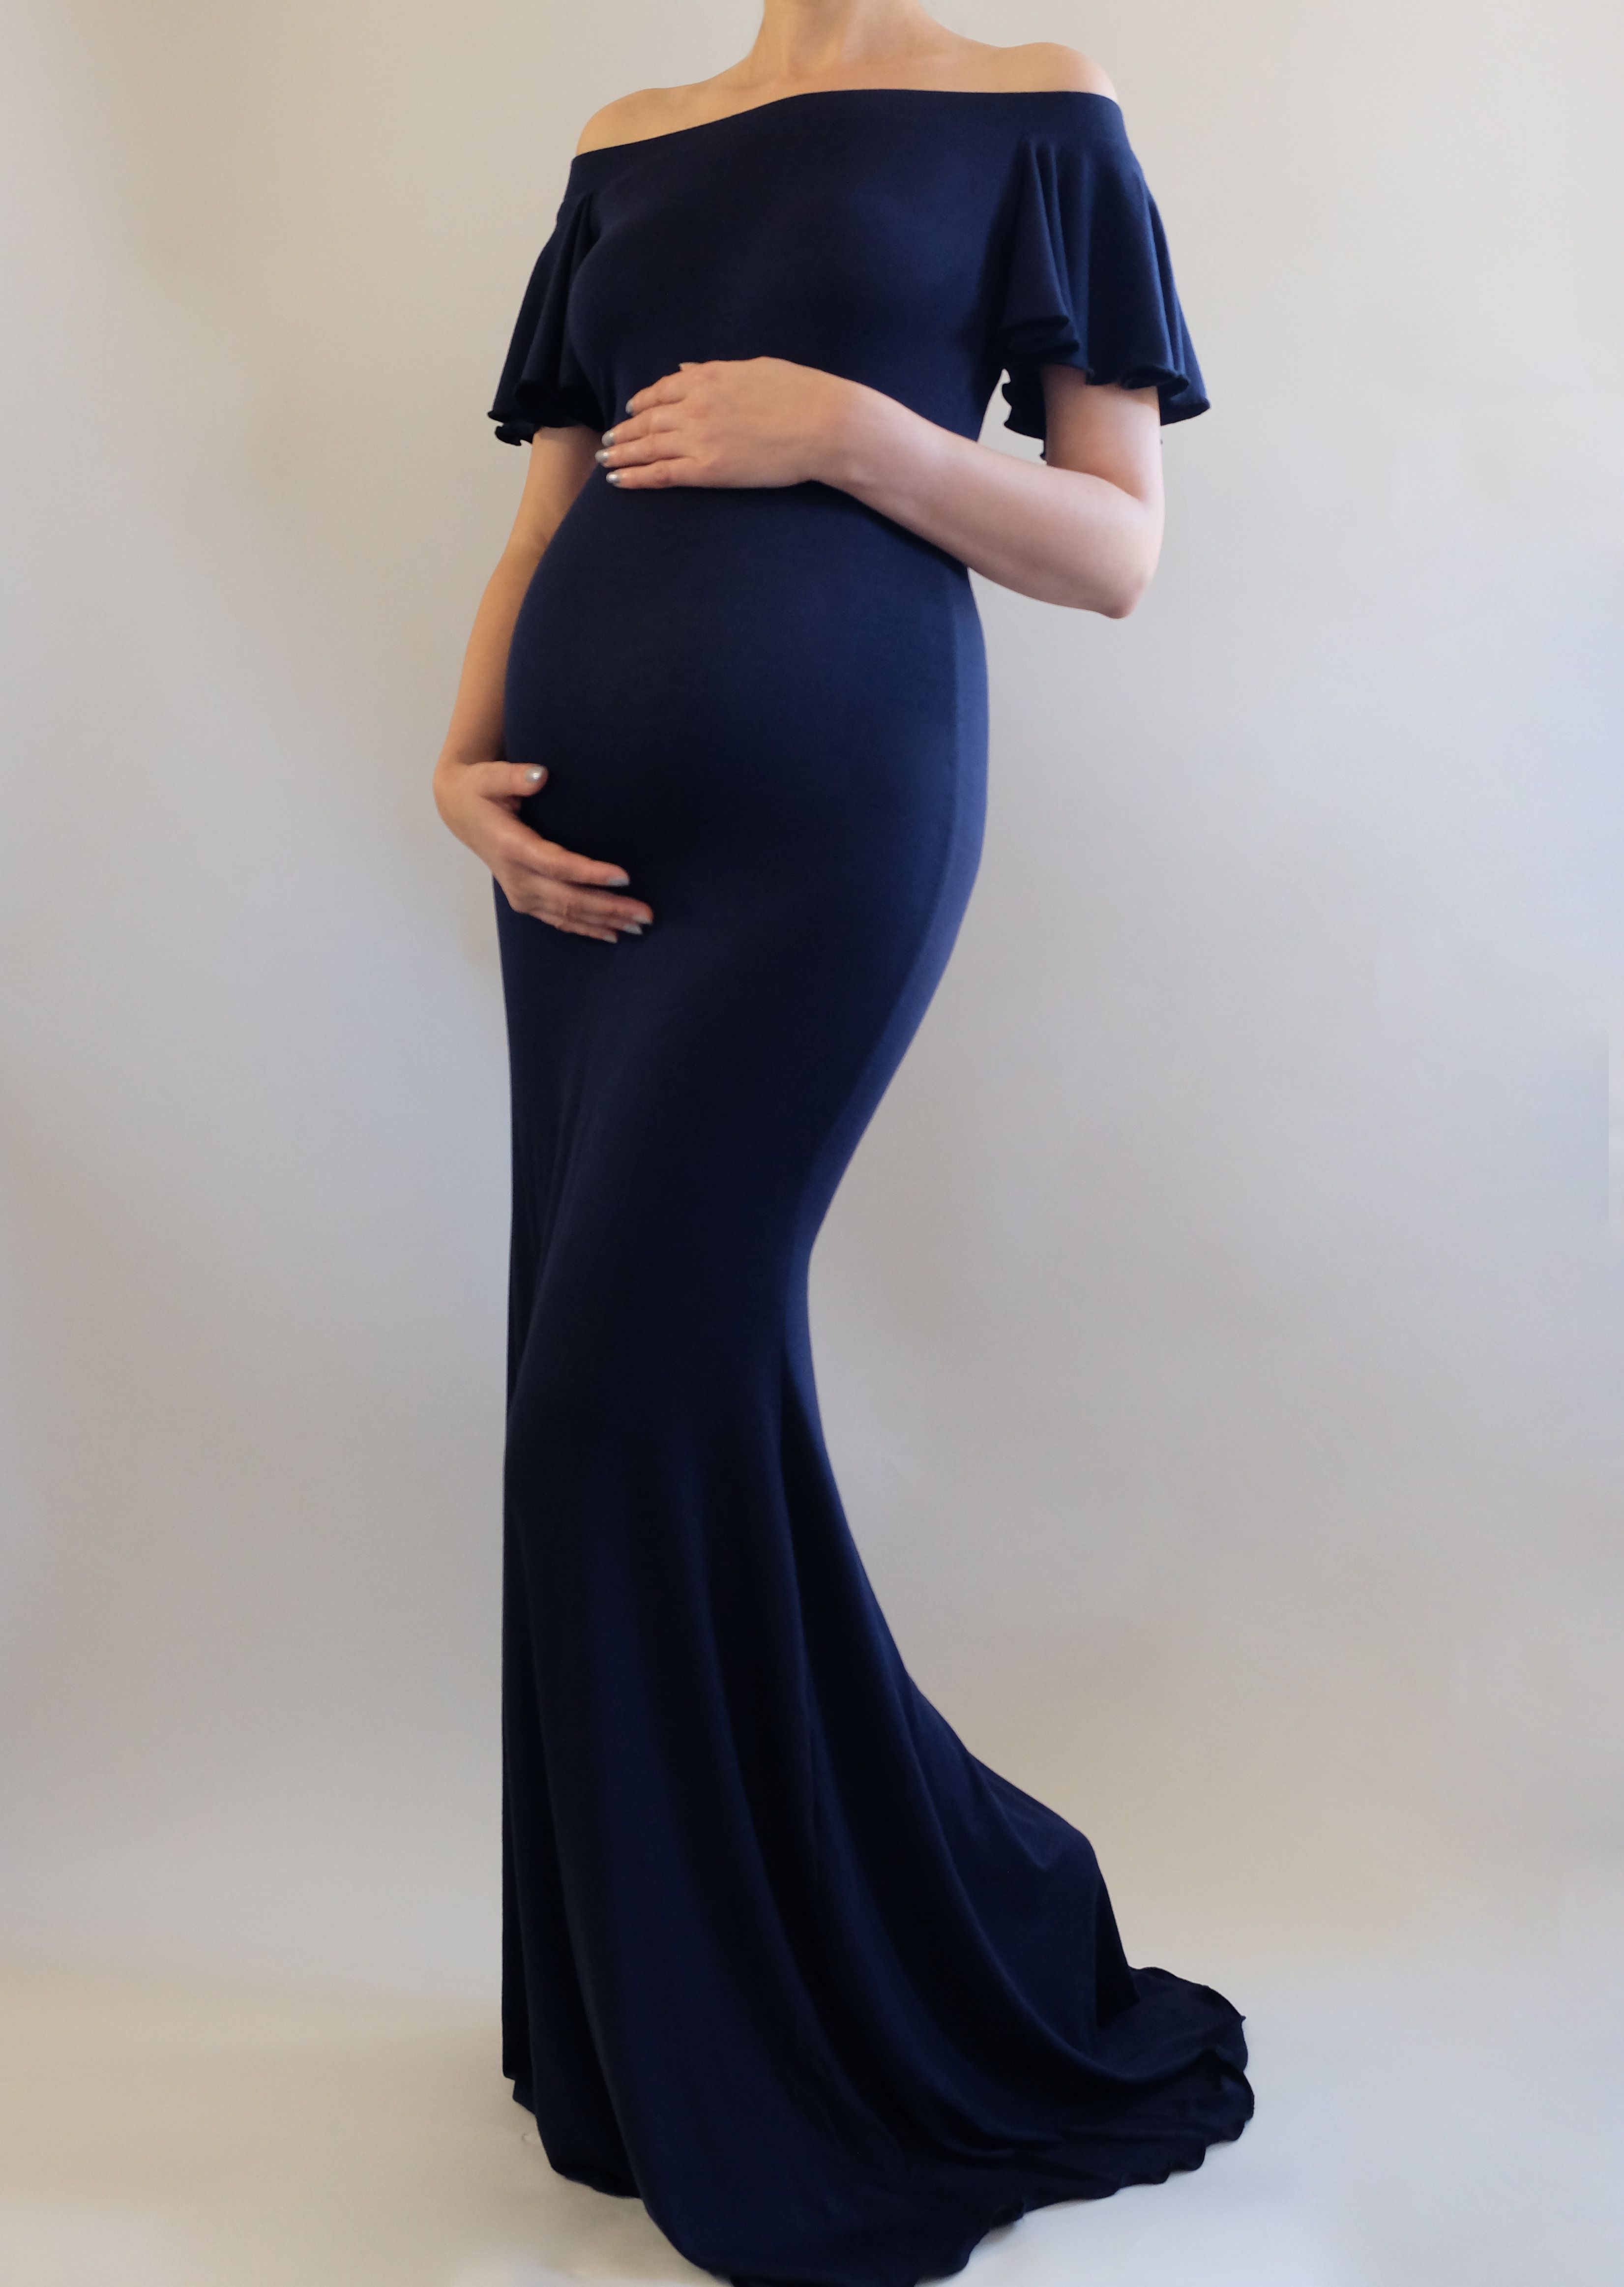 Full Size of Baby Shower:sturdy Stylish Maternity Dresses For Baby Shower Picture Ideas Stylish Maternity Dresses For Baby Shower Iris Baby Shower Dress Fitted Maternity Dress Maternity Gown Baby